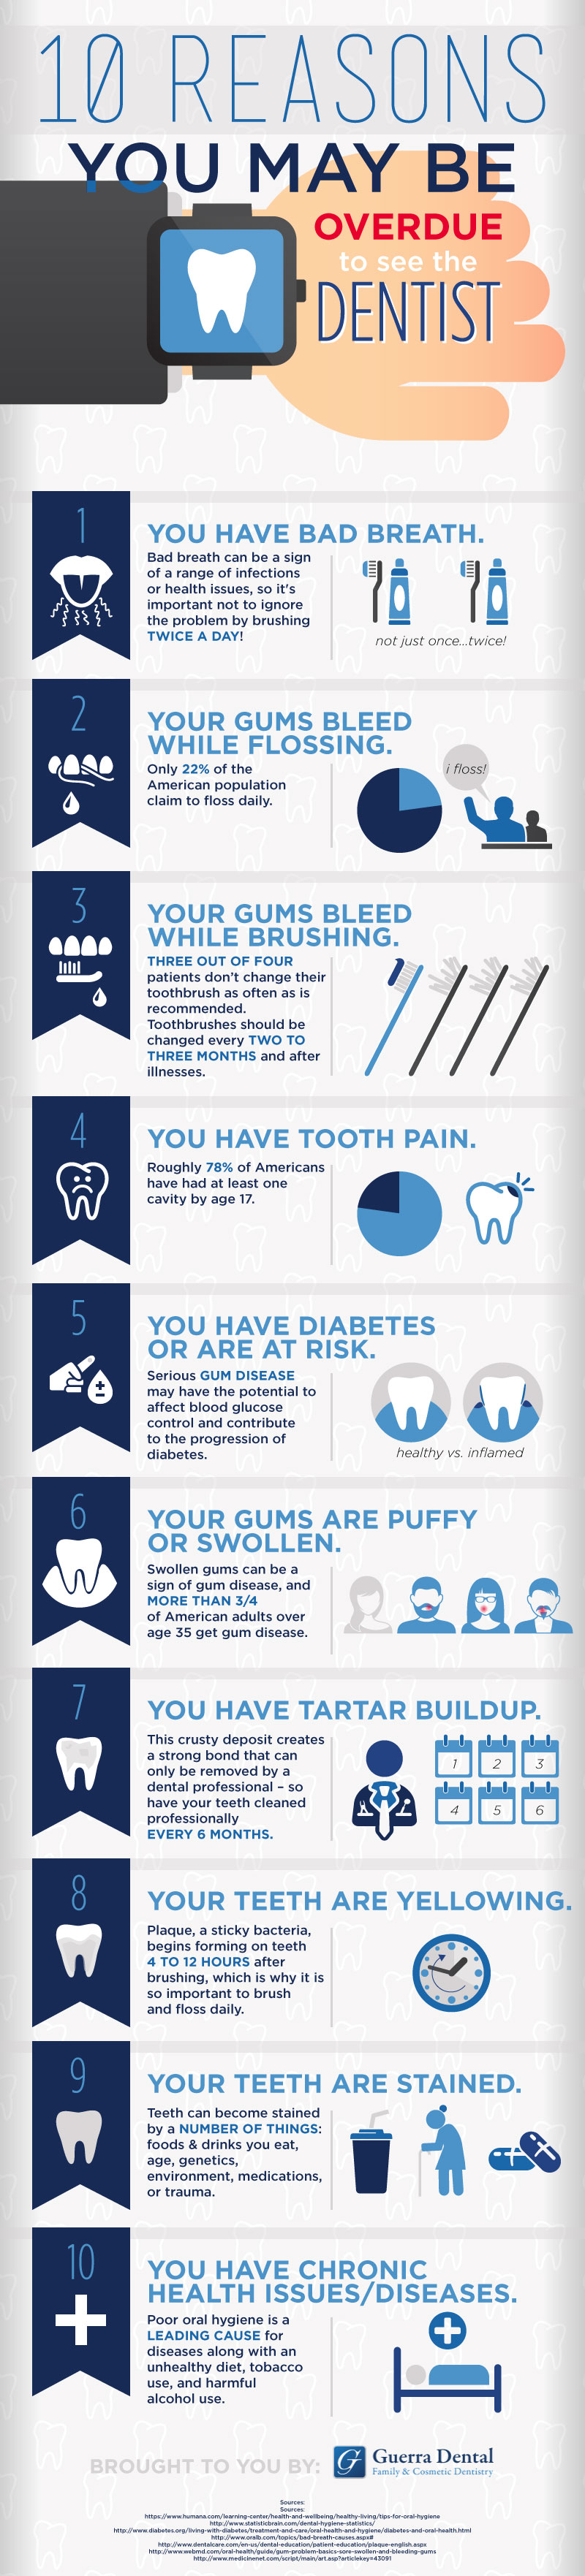 reasons-overdue-dentist-infographic